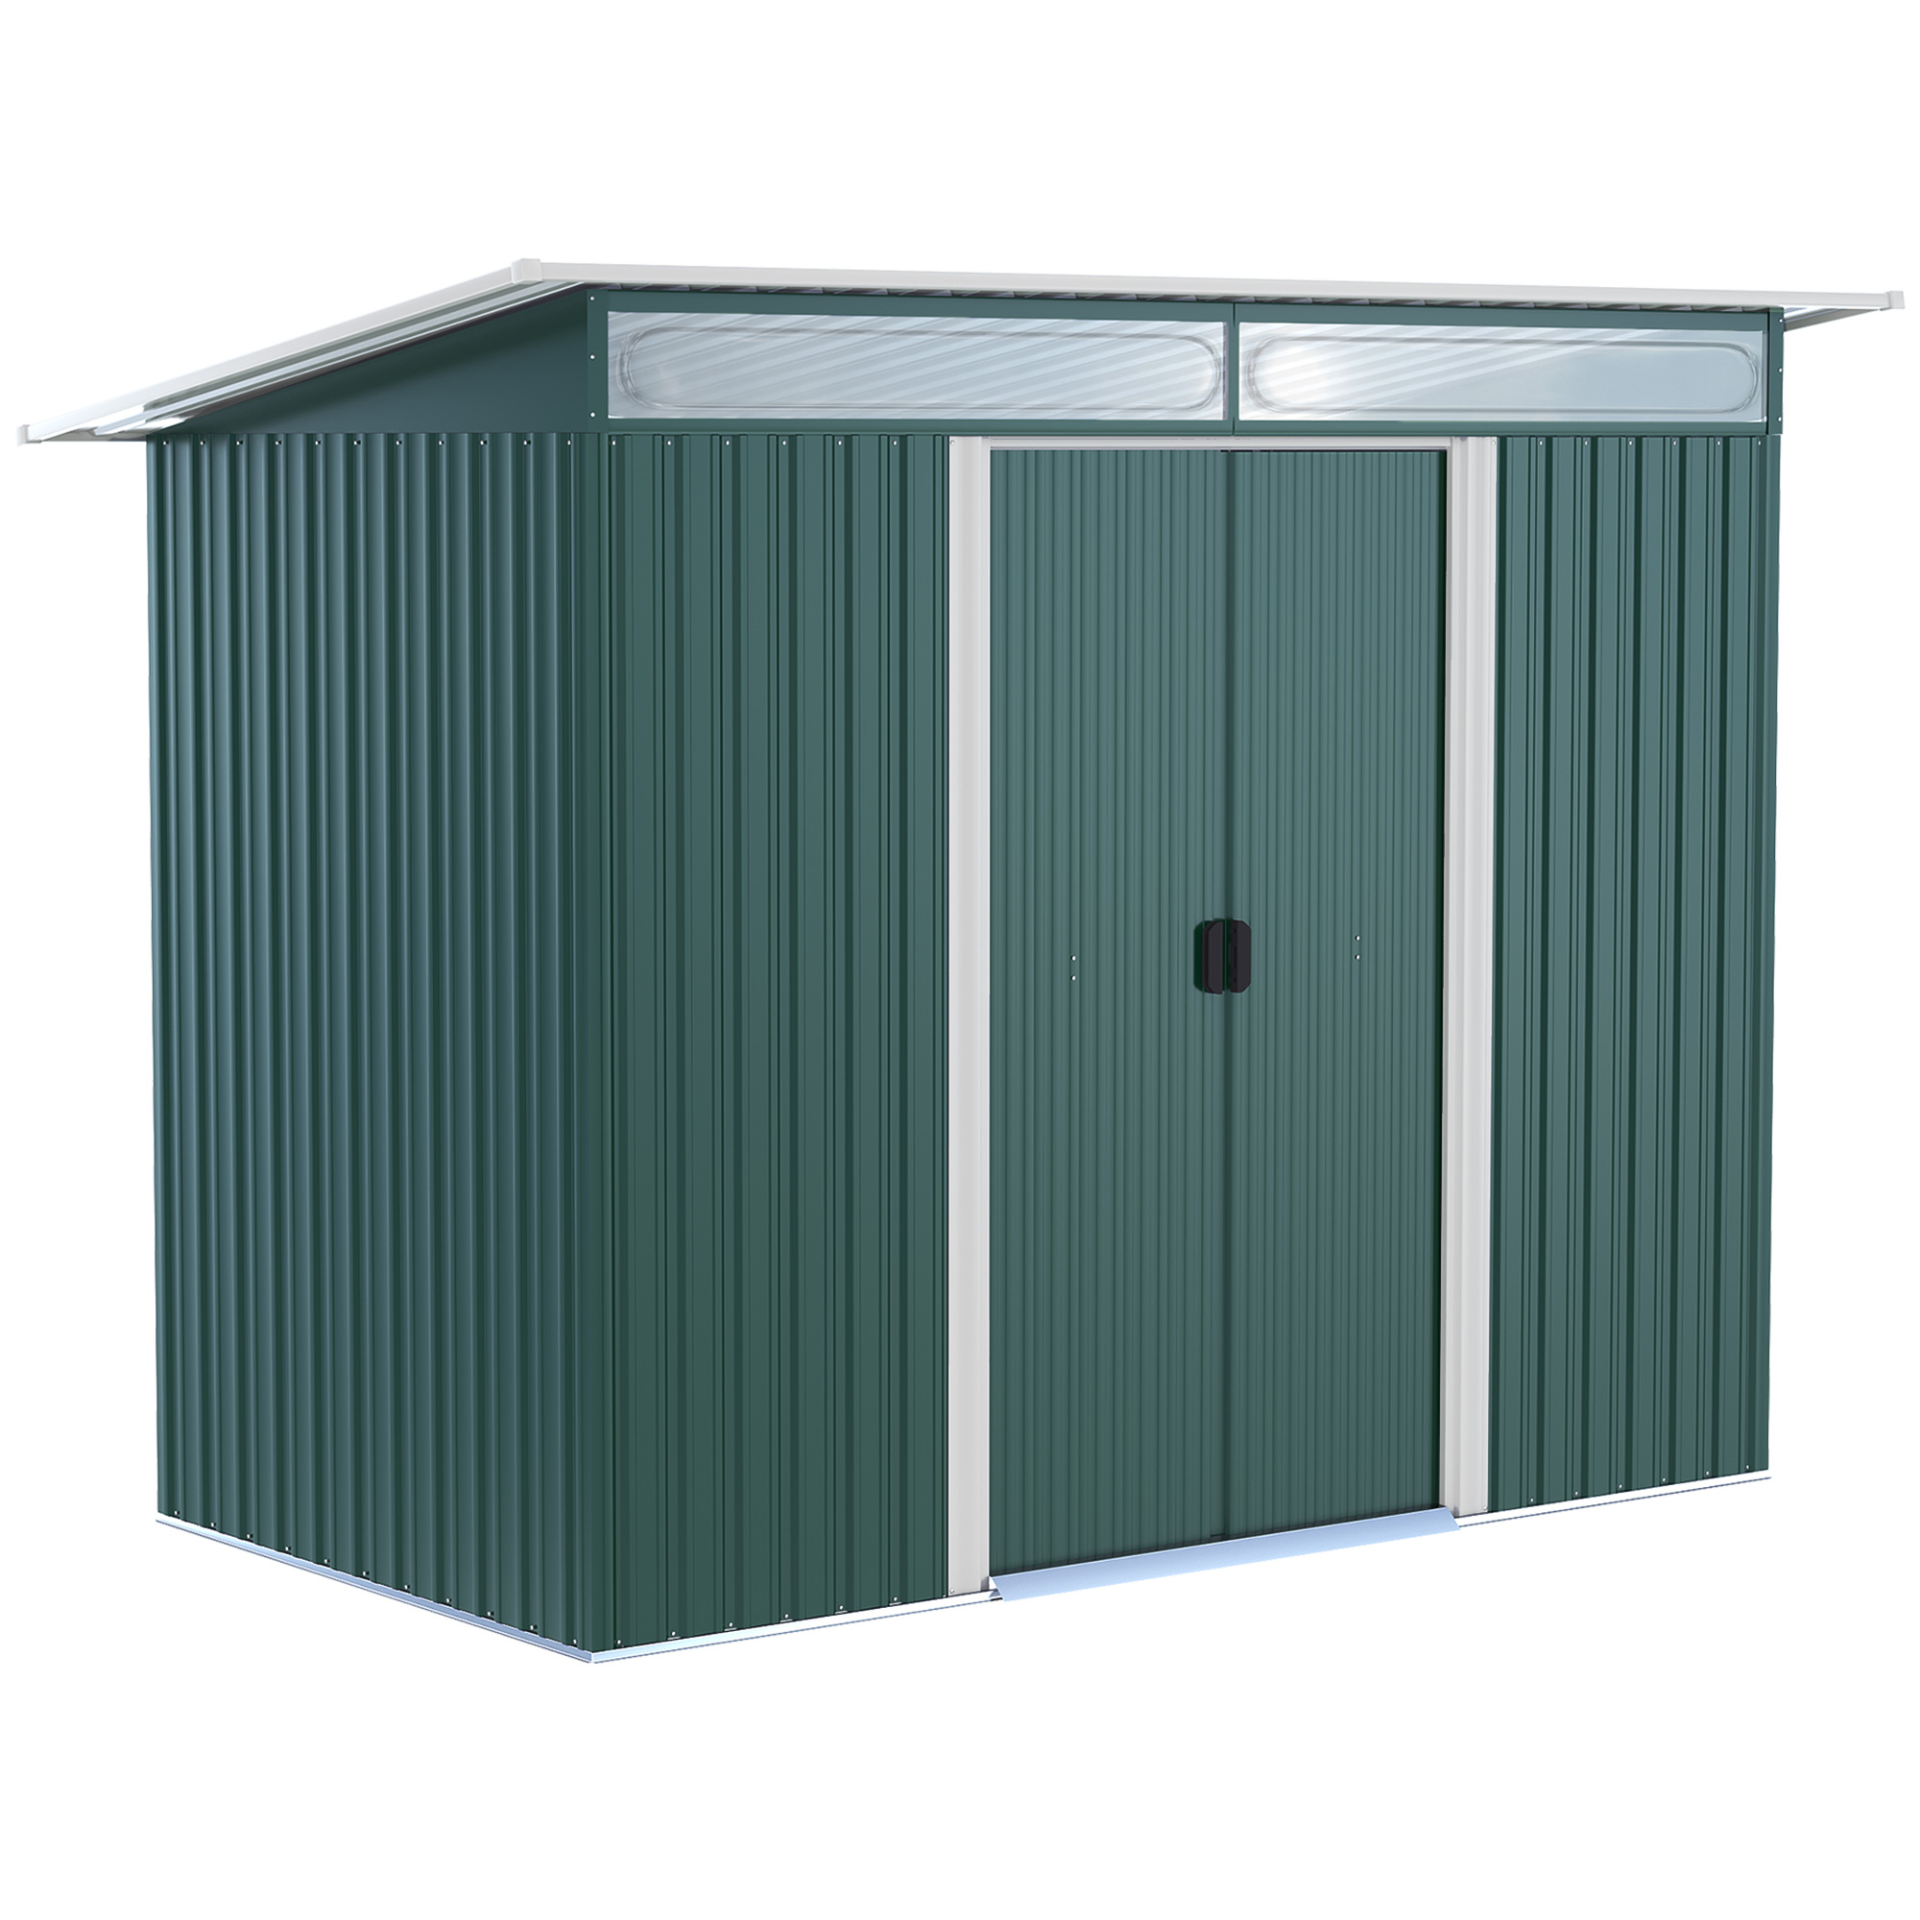 Outsunny Garden Metal Storage Shed House Hut Gardening Tool Storage w/ Tilted Ro